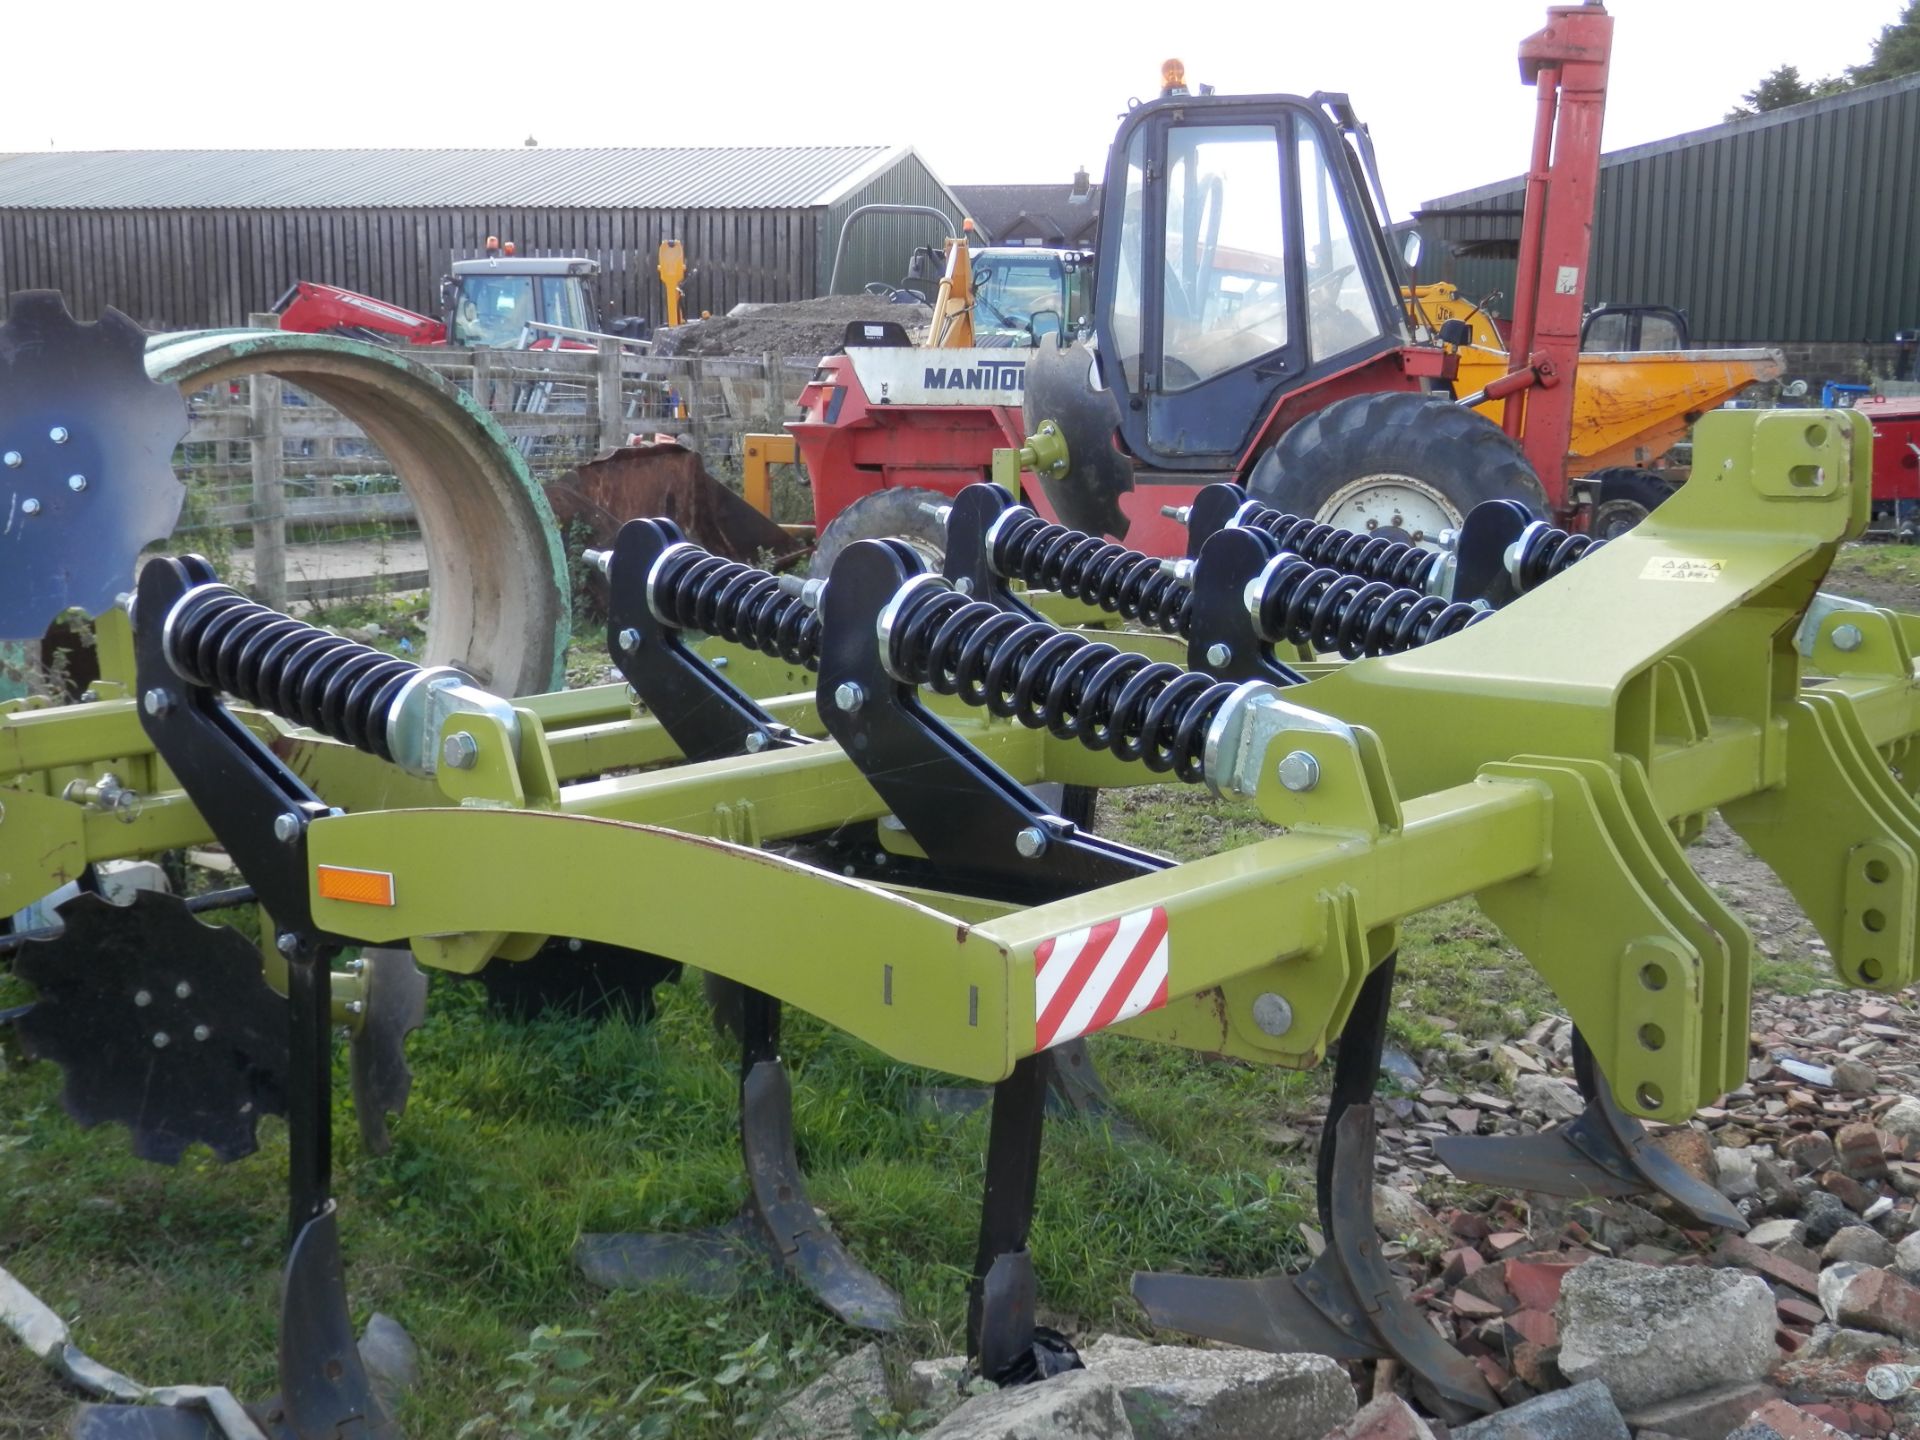 2014 UNUSED/NEW TERESA ASG-30 MINIMUM CULTIVATION TRACTOR ATTACHMENT (LEMKIN PARTS) POLISH MADE. - Image 2 of 8